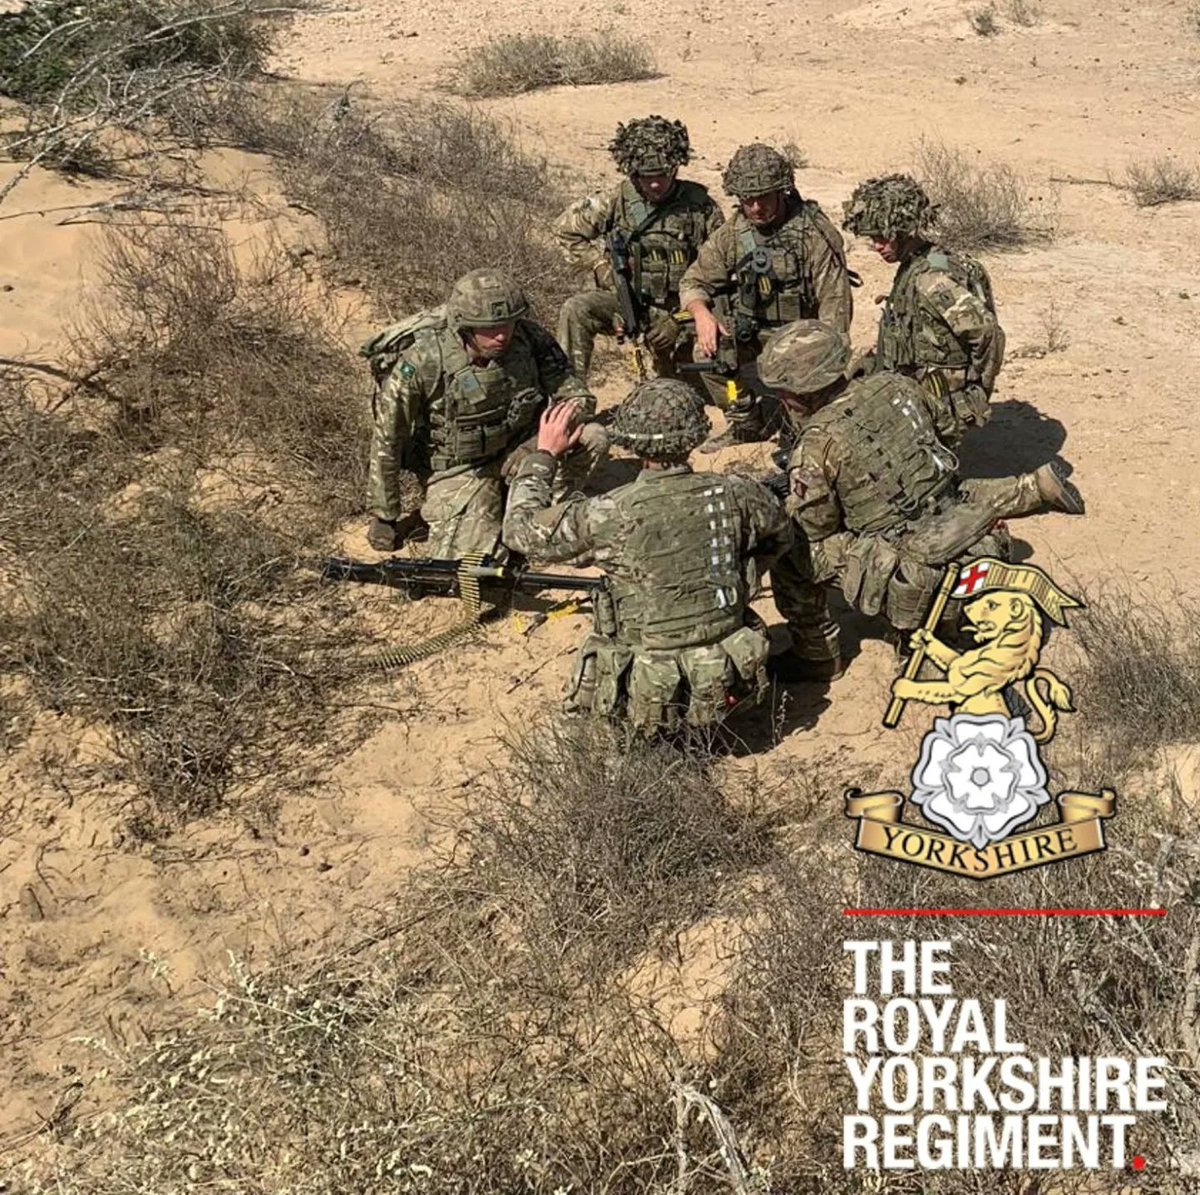 Our 1st Battalion recently returned from overseas training that saw them conducting Live Fire Tactical Training in arduous terrain and with a level of realism, scale, and resourcing that tested even the soldiers of our Yorkshire Infantry. @7thRats #fortunefavoursthebrave